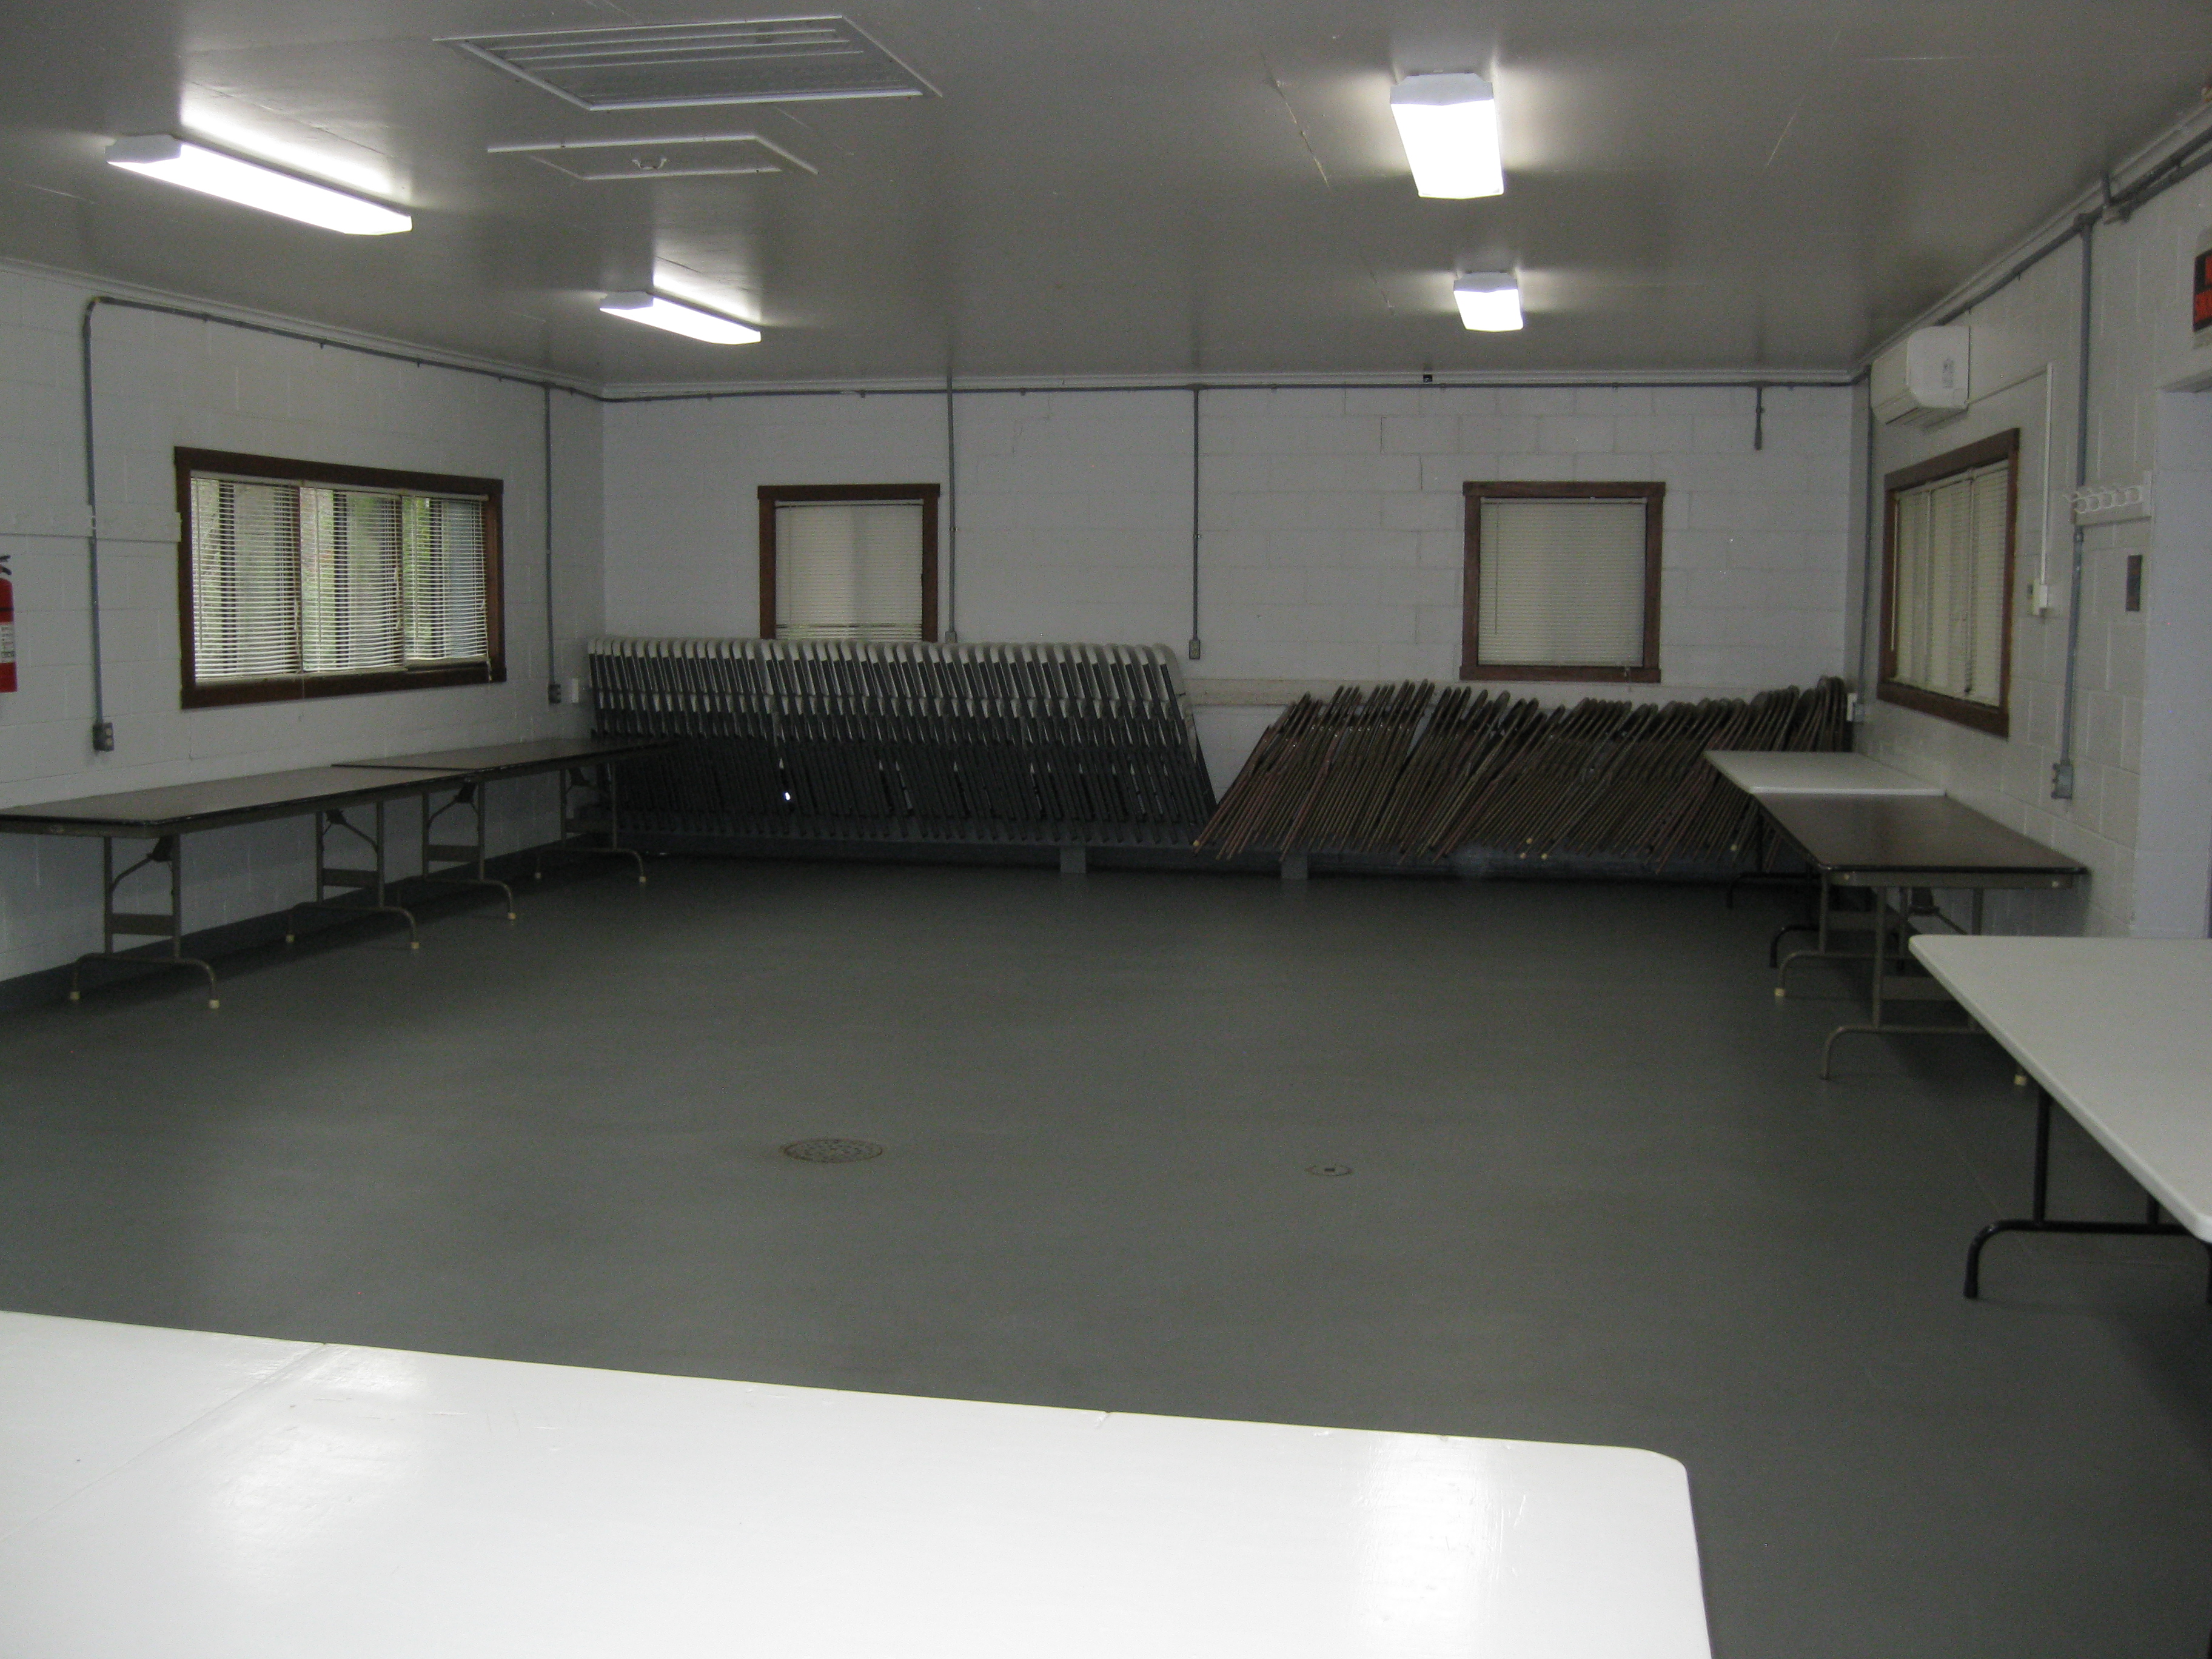 Tables and folding chairs against the walls inside the enclosed shelter